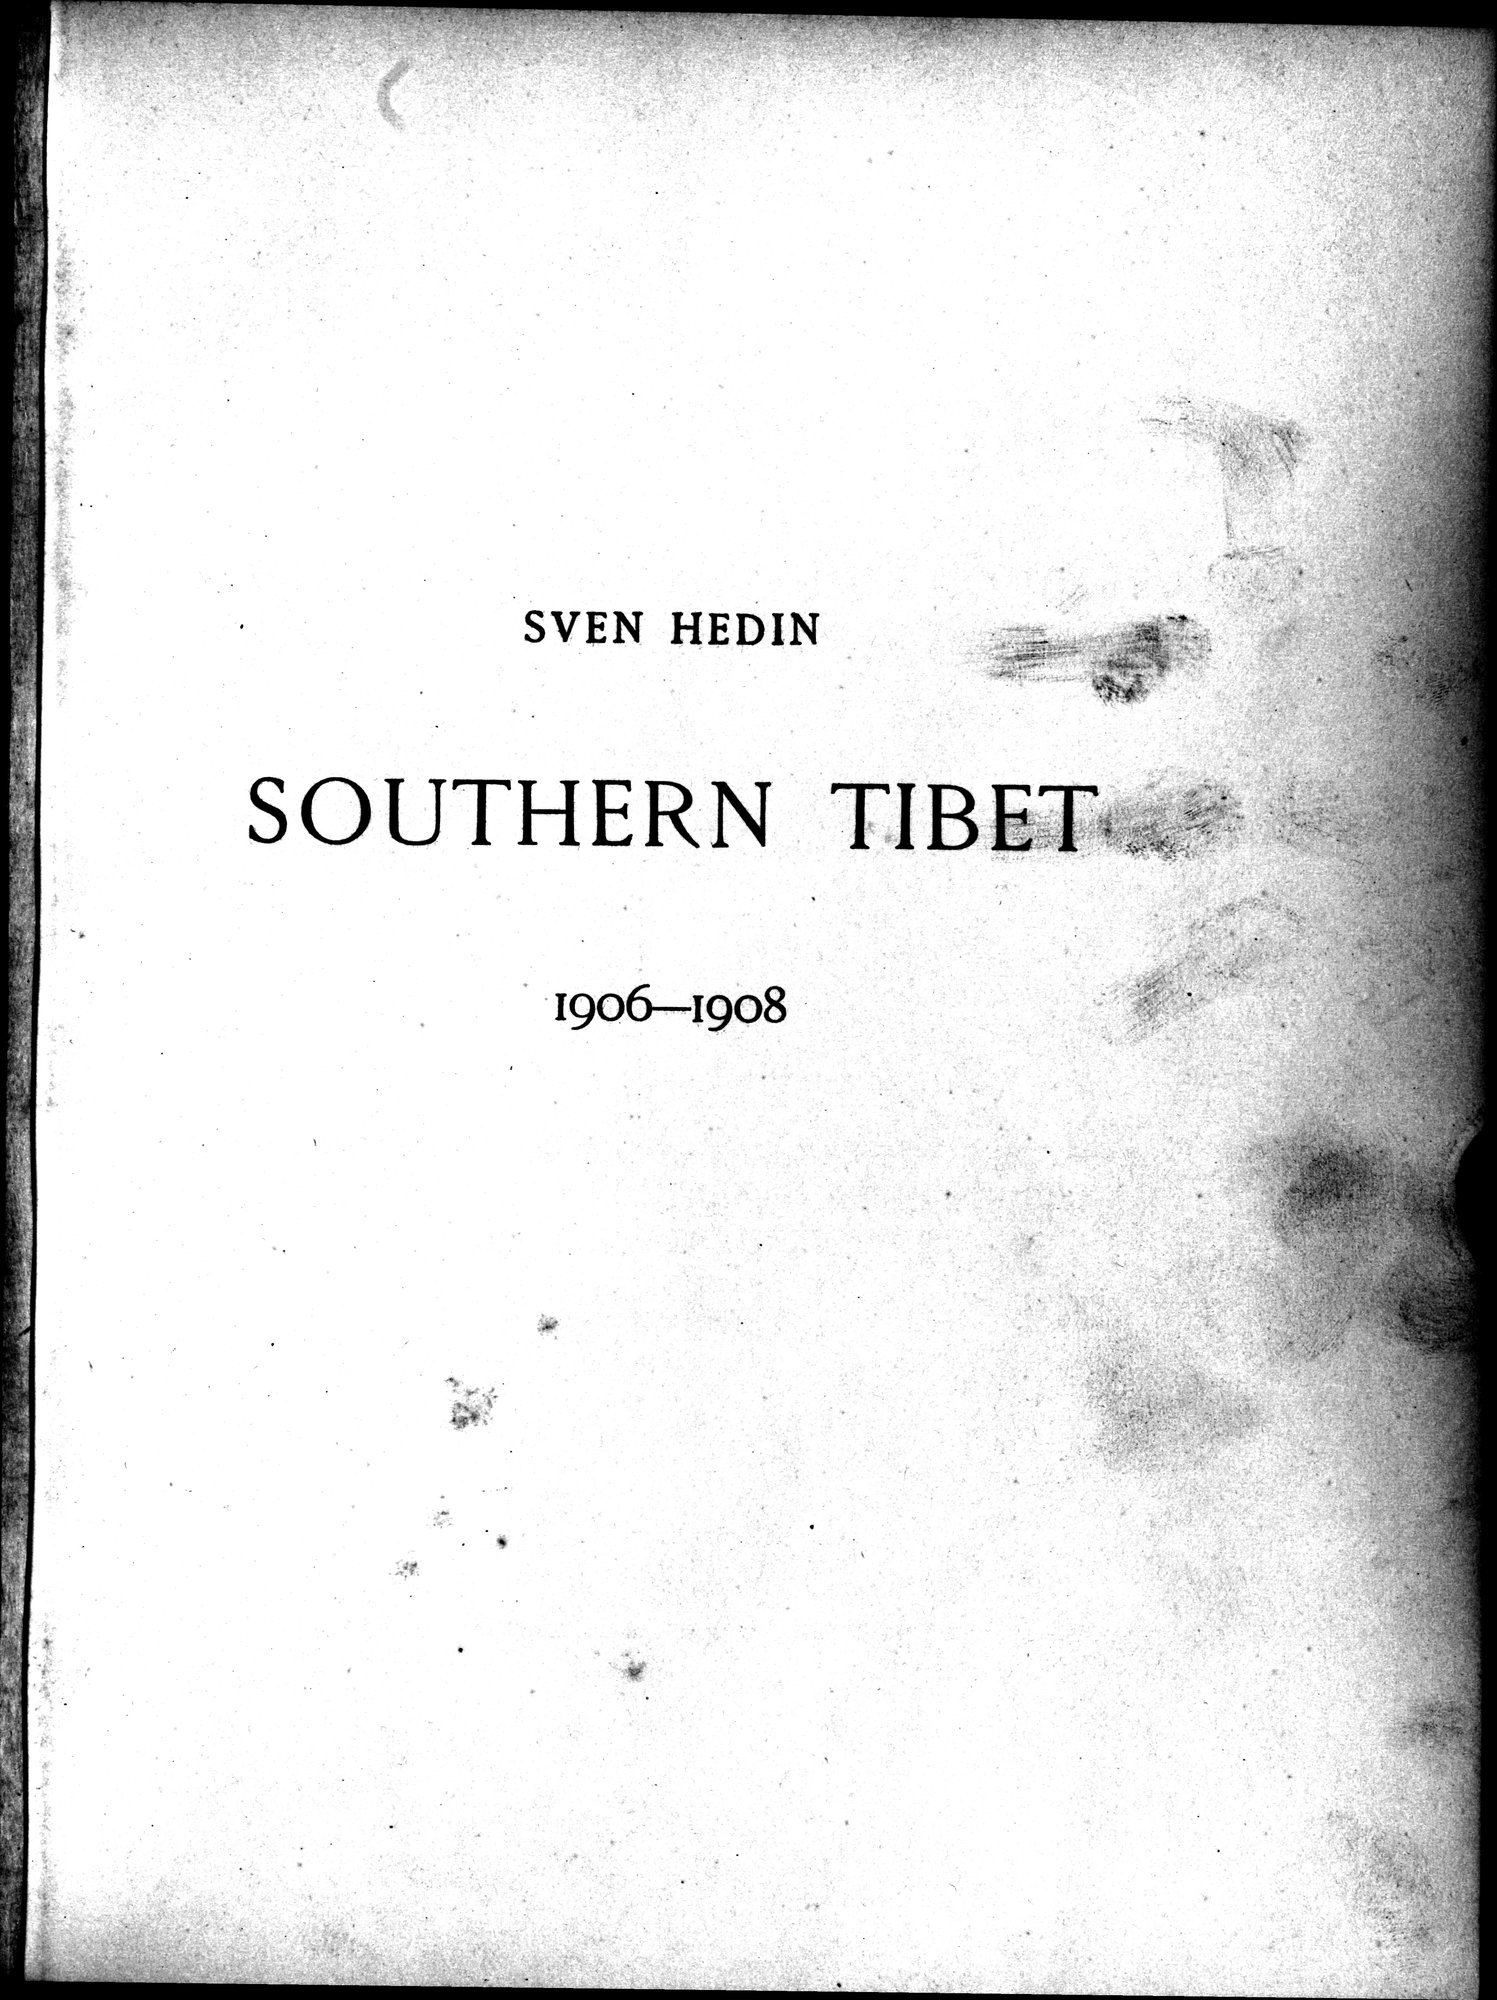 Southern Tibet : vol.1 / Page 9 (Grayscale High Resolution Image)